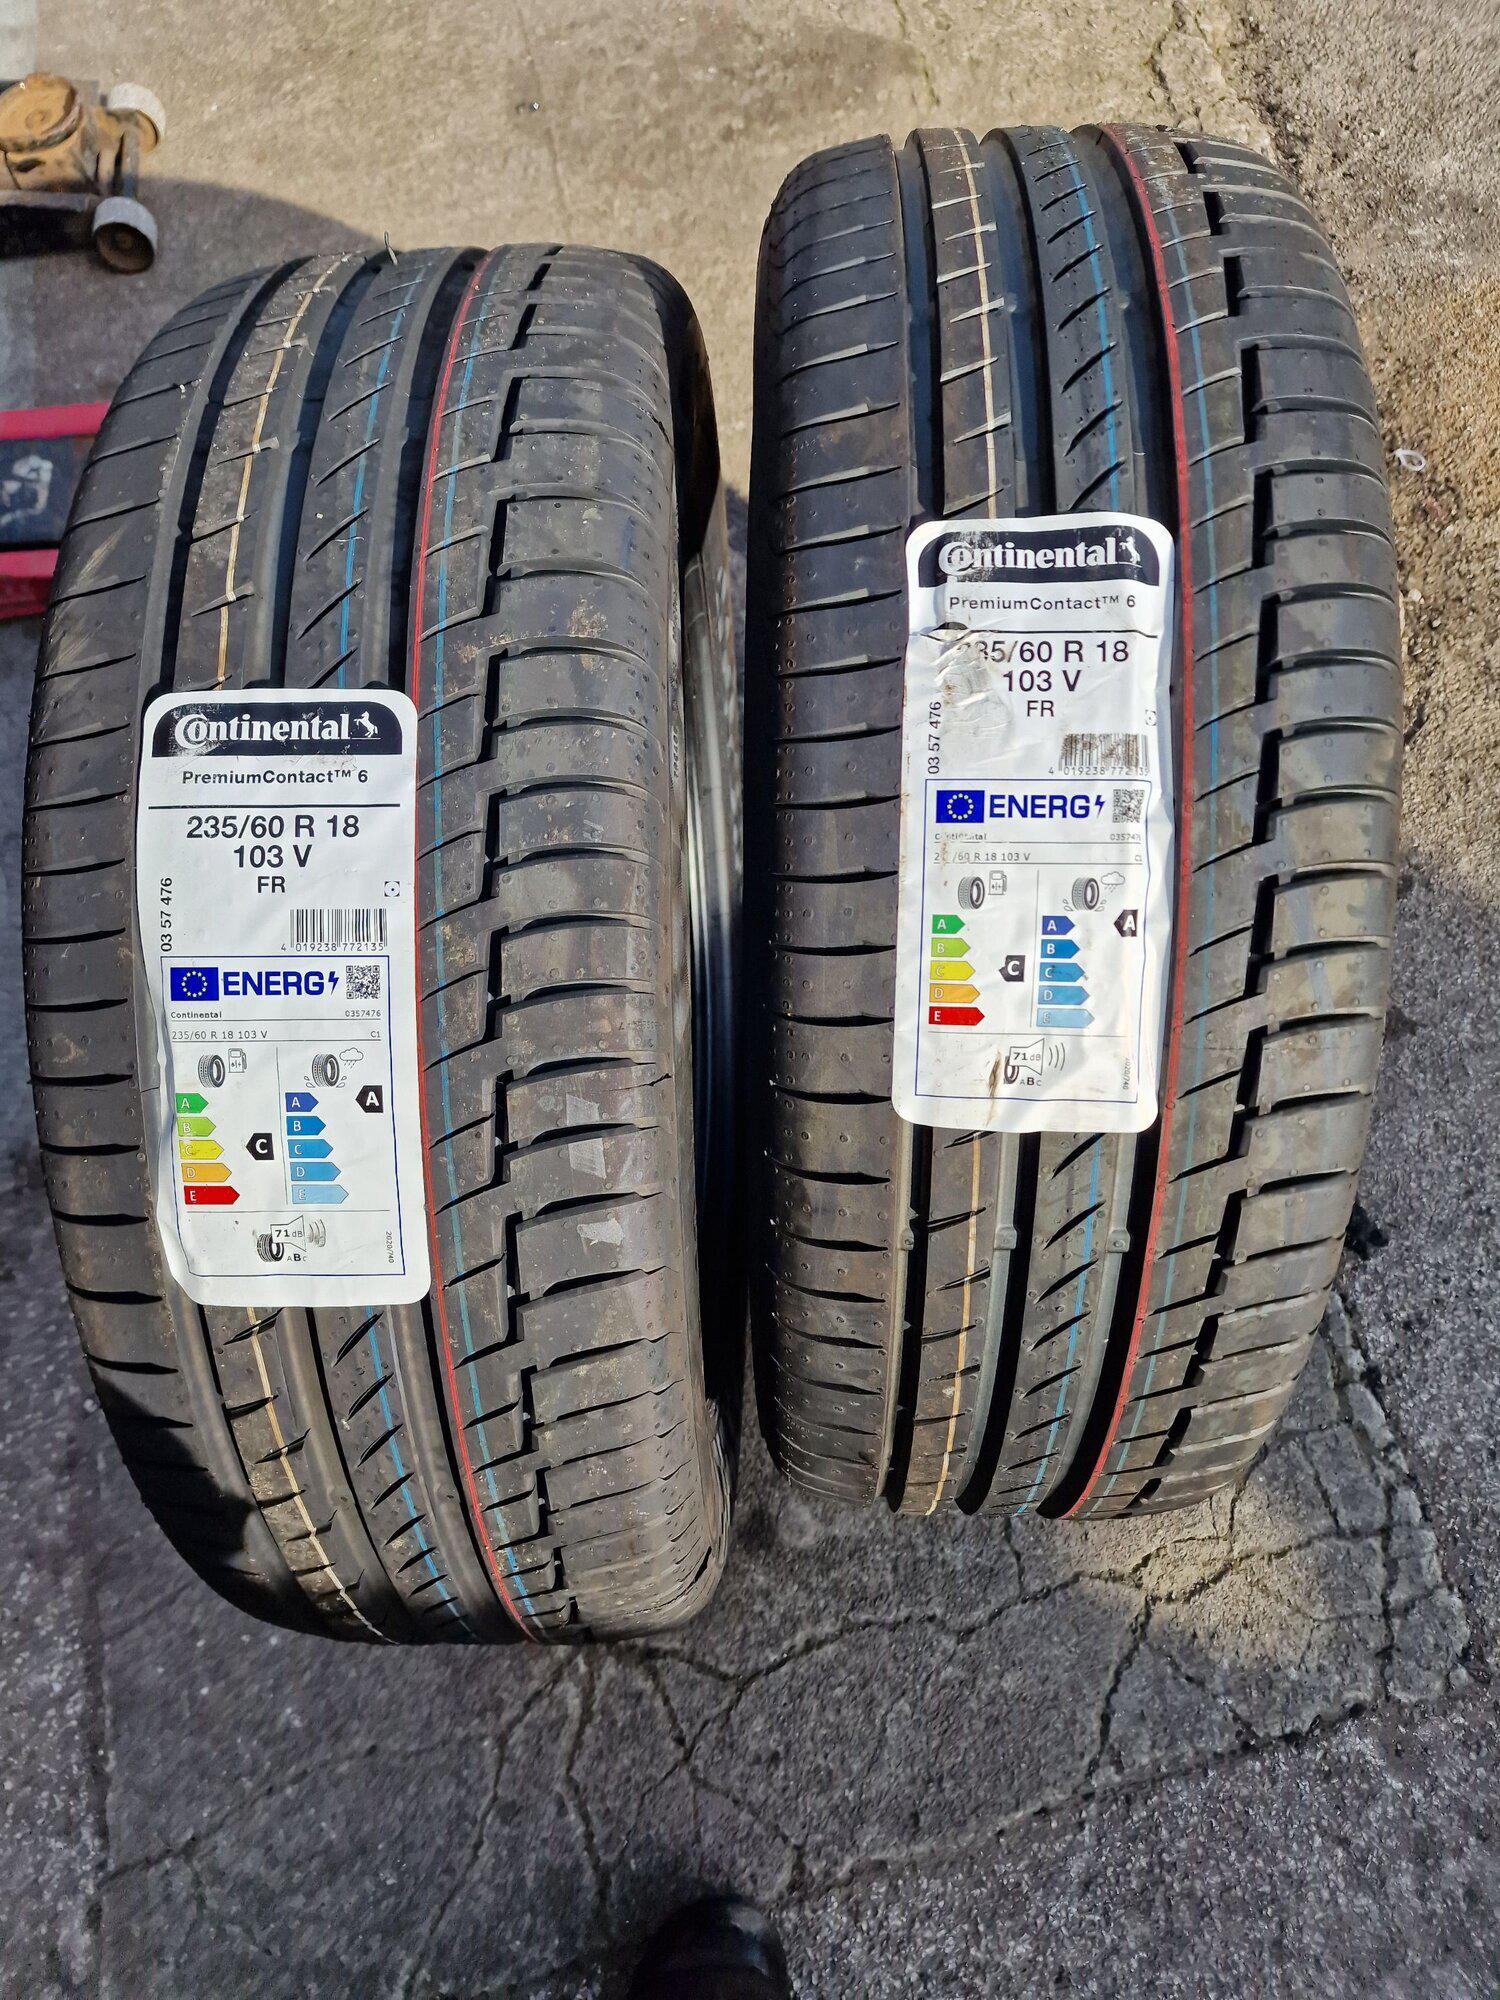 Images Dan's Mobile Tyres 24/7